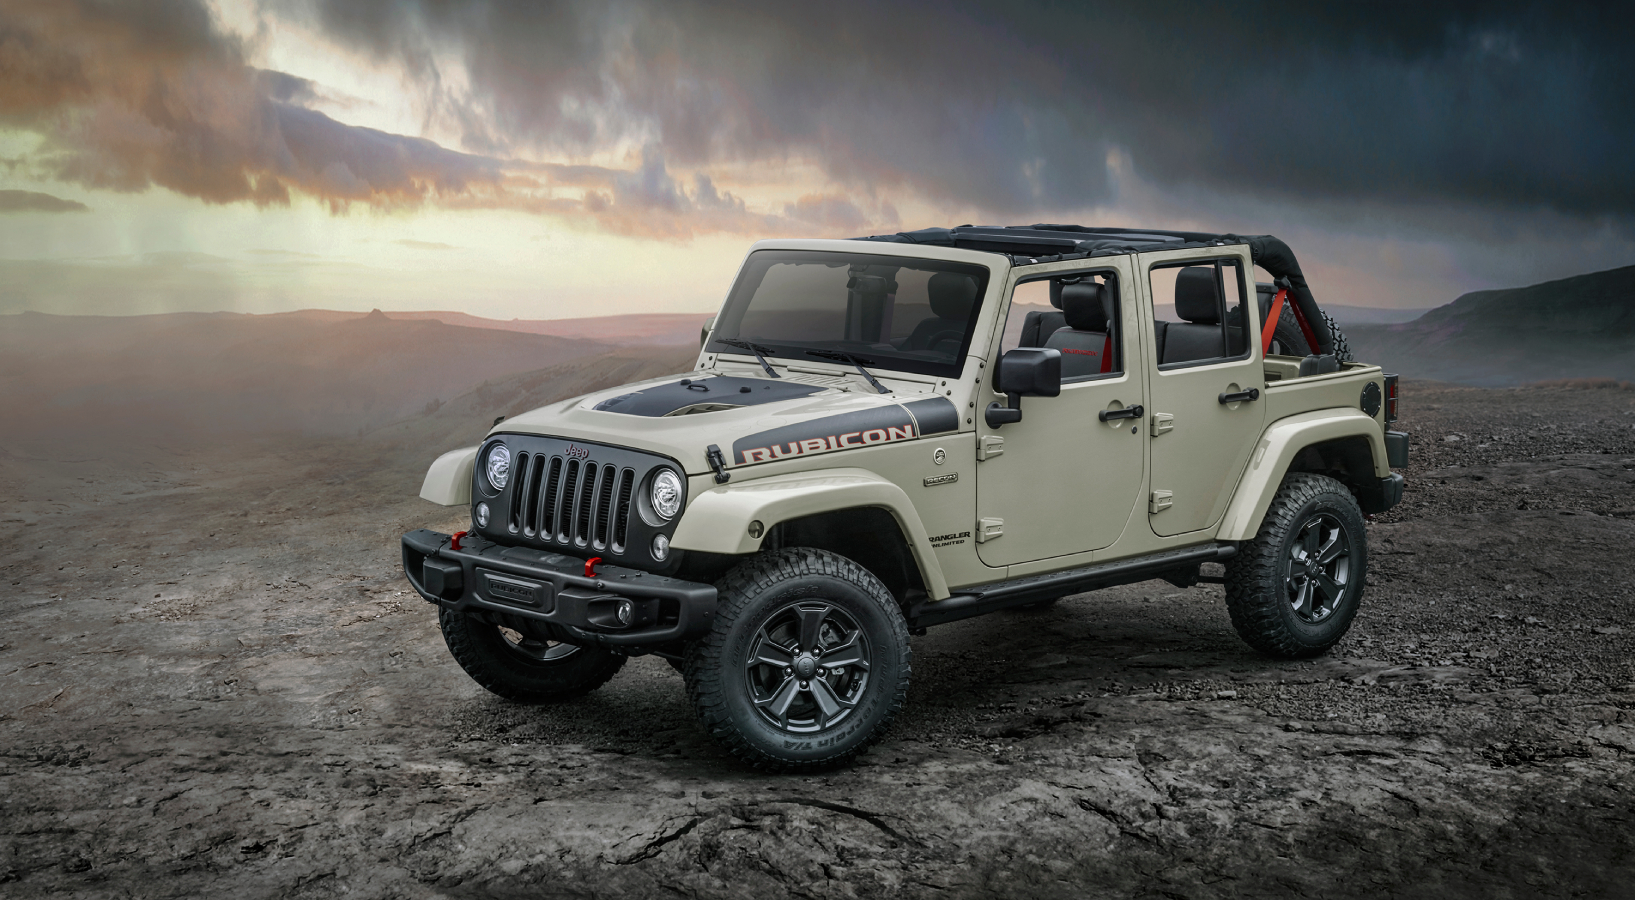 Best Used Jeep Wrangler SUV Years: Models to Hunt for and 1 to Avoid